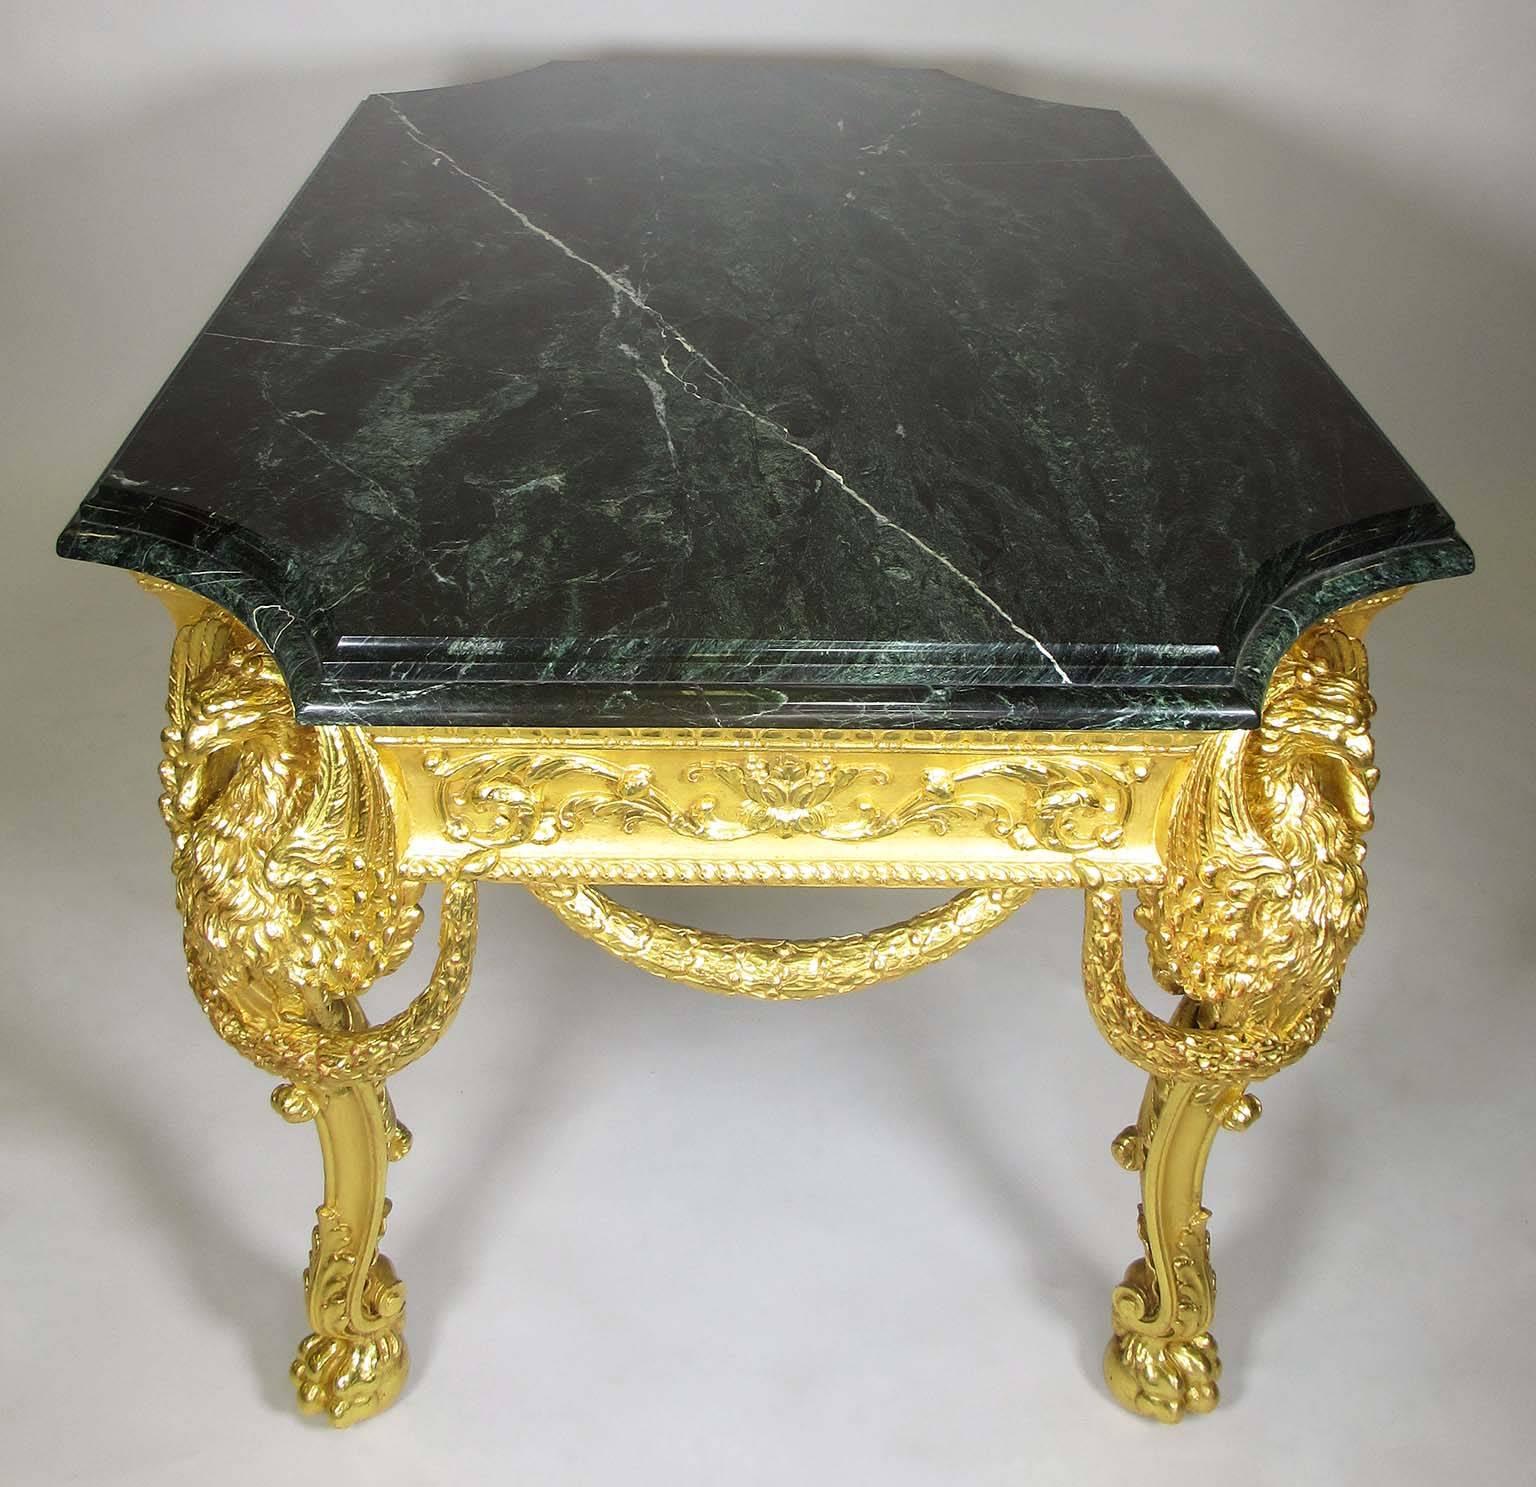 Palatial French 19th Century Empire Style Giltwood Carved Eagles Center Table For Sale 2